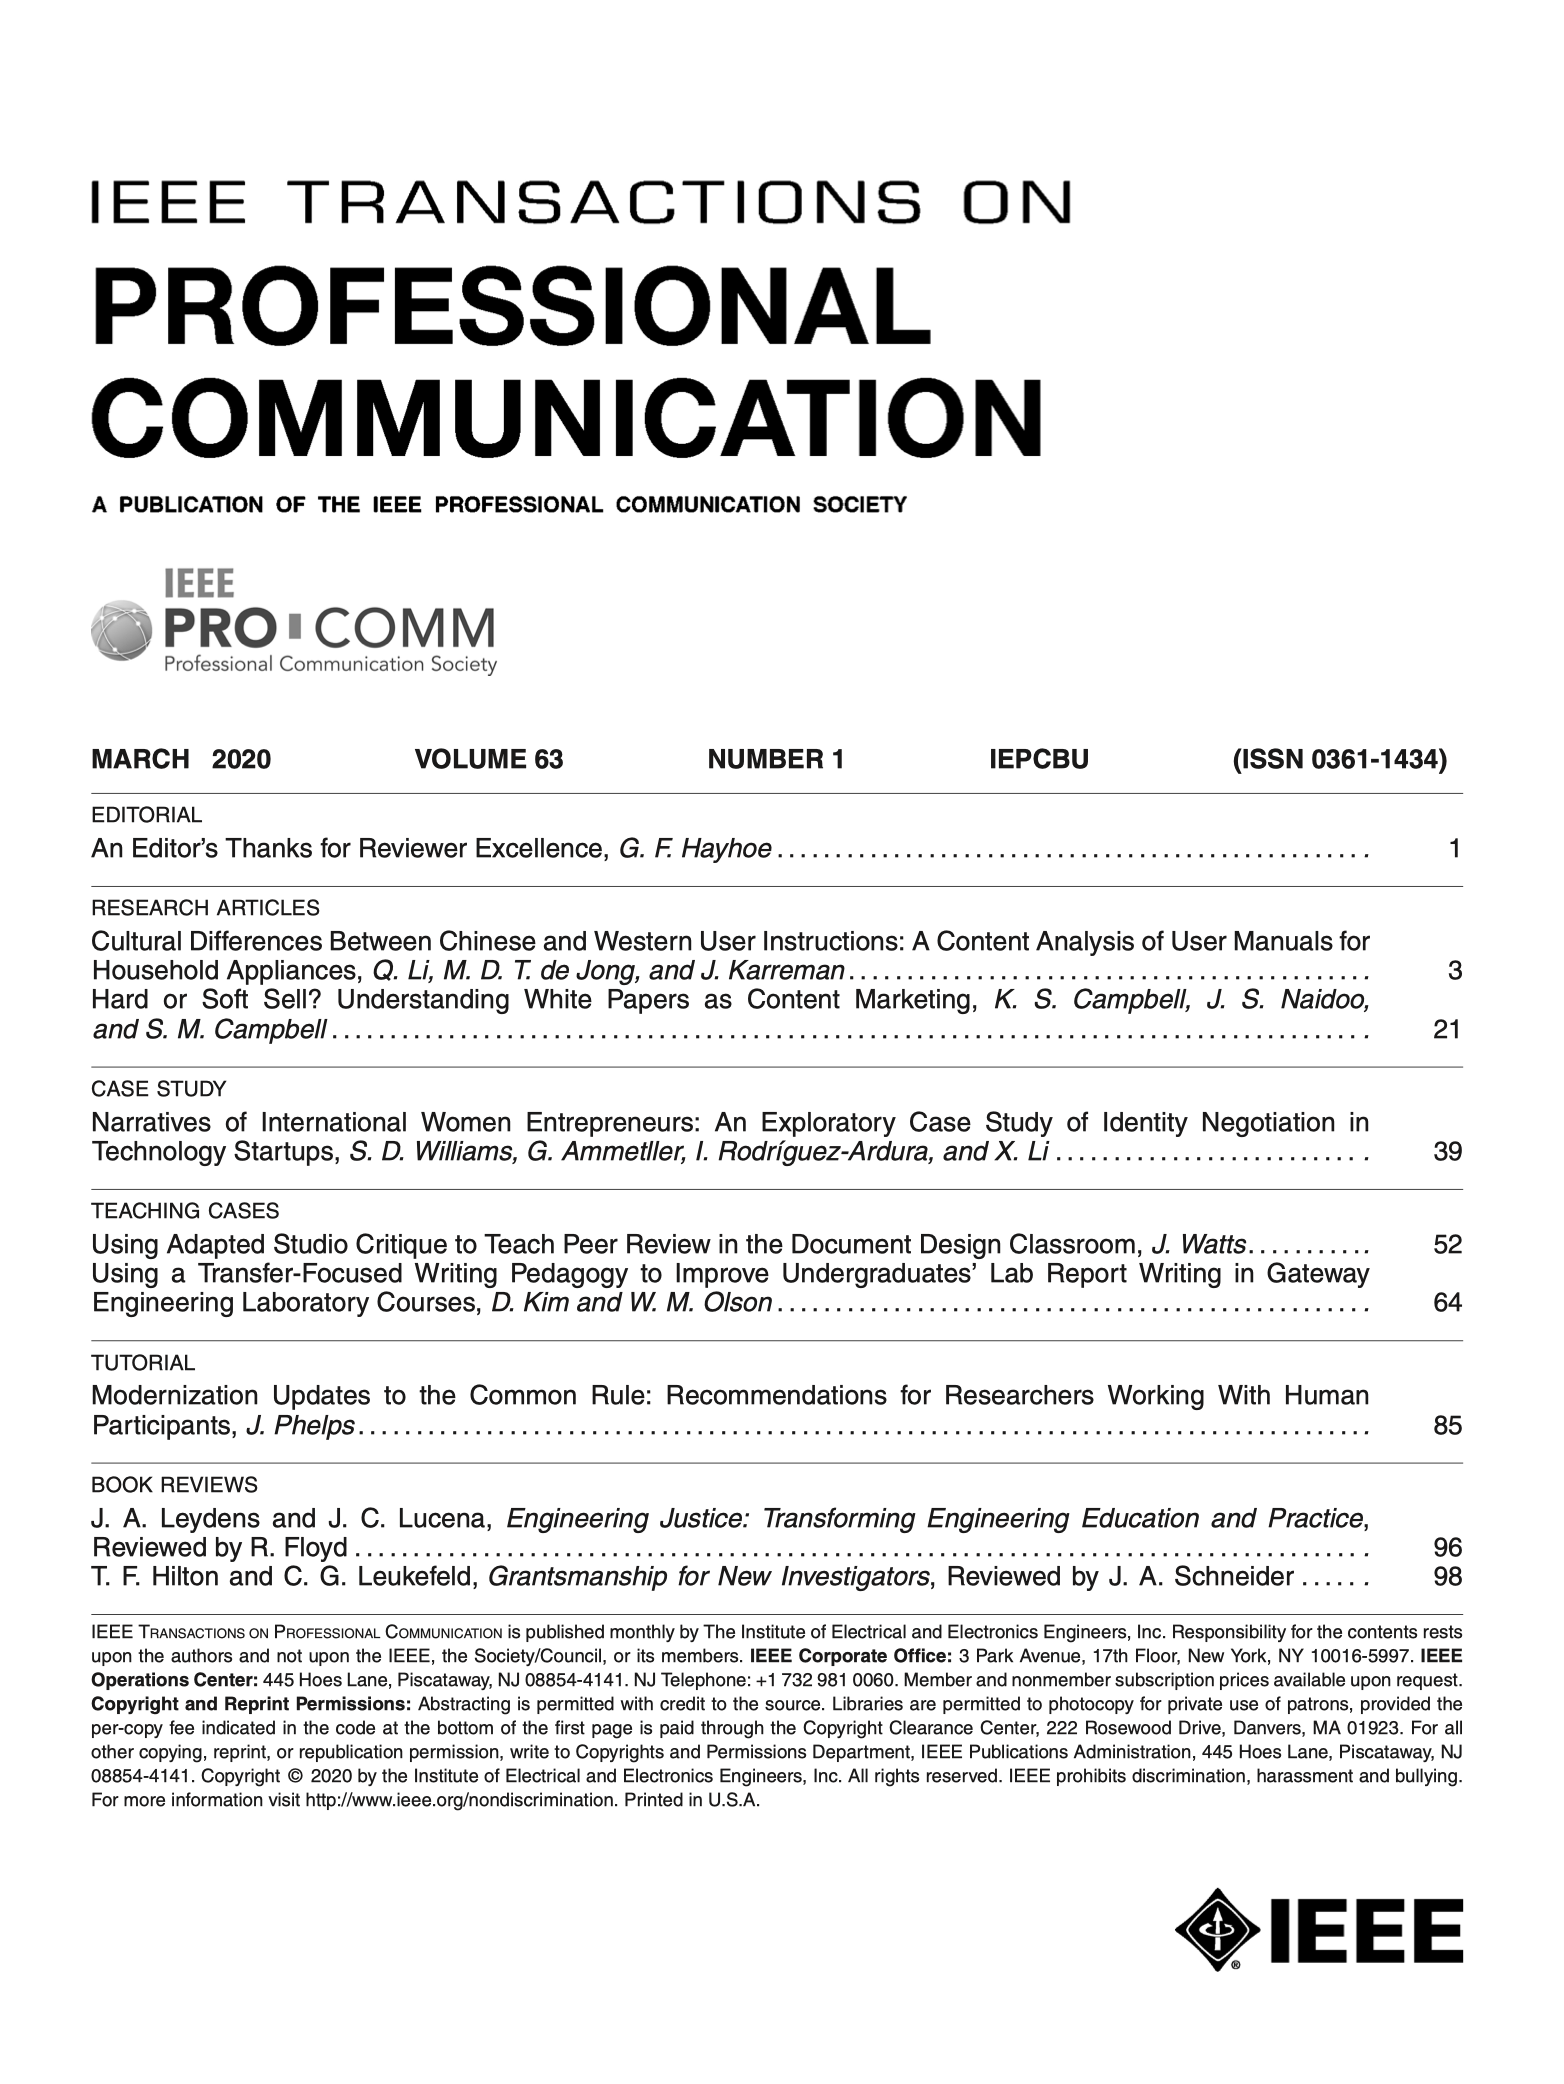 Volume 63 Number 1 March 2020 Of Ieee Transactions On Professional Communication Now Available Ieee Professional Communication Society